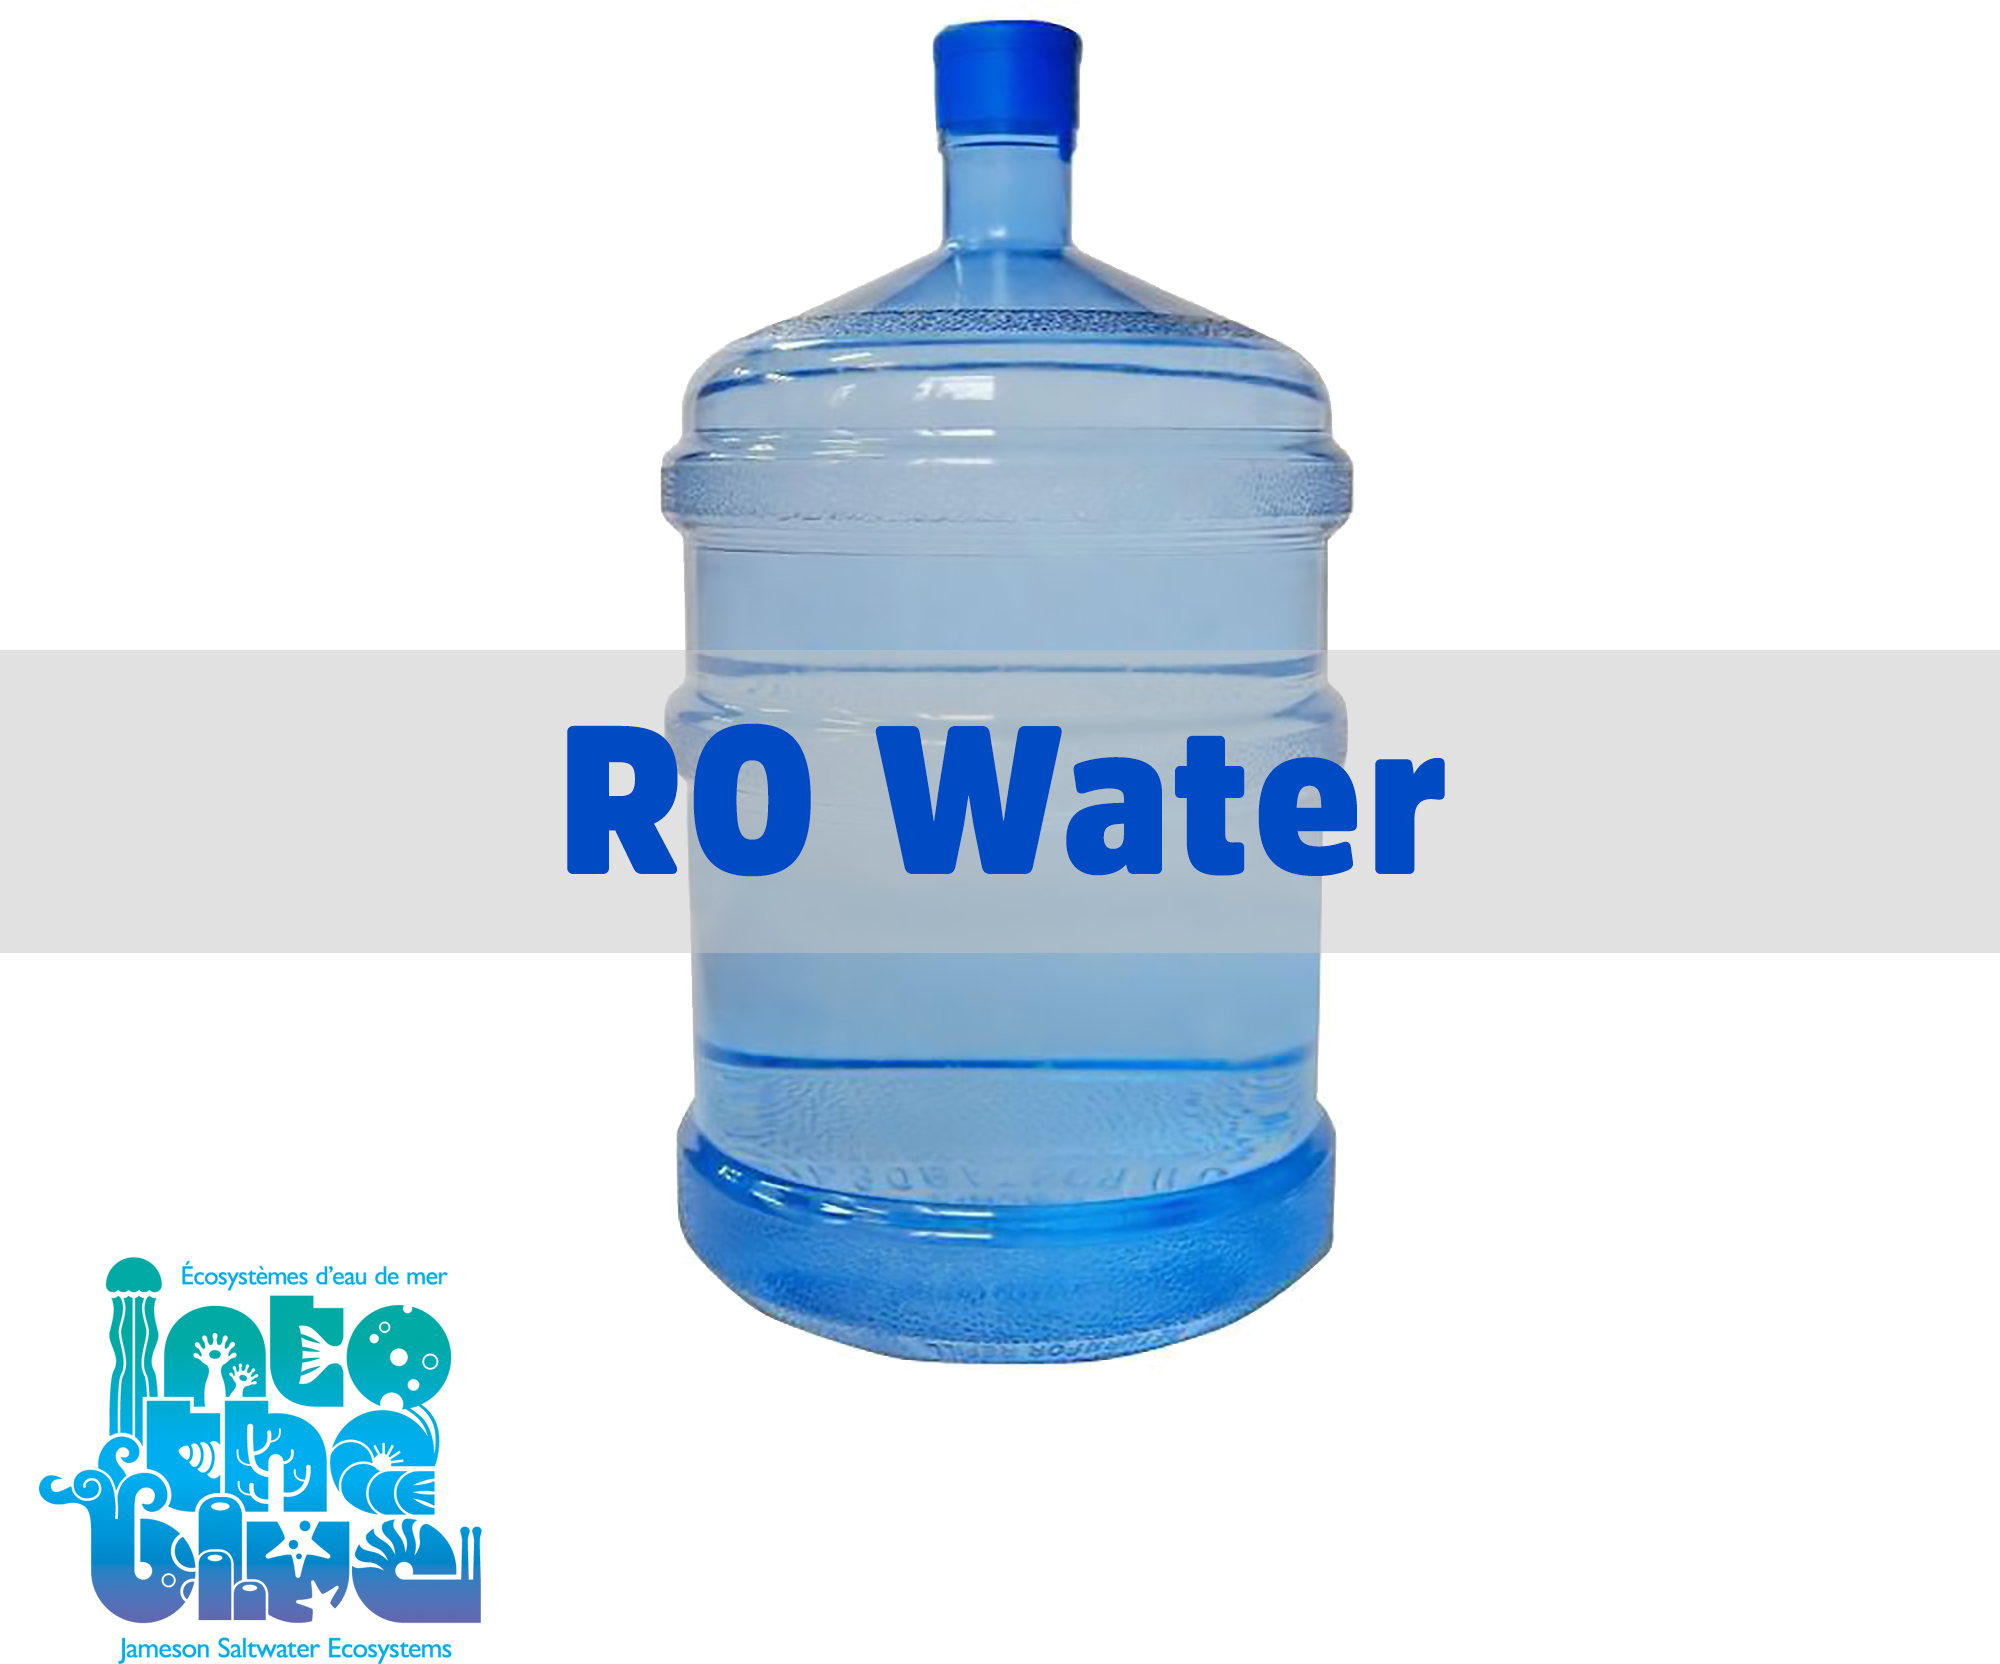 You may hear people talk about “R.O. water,”